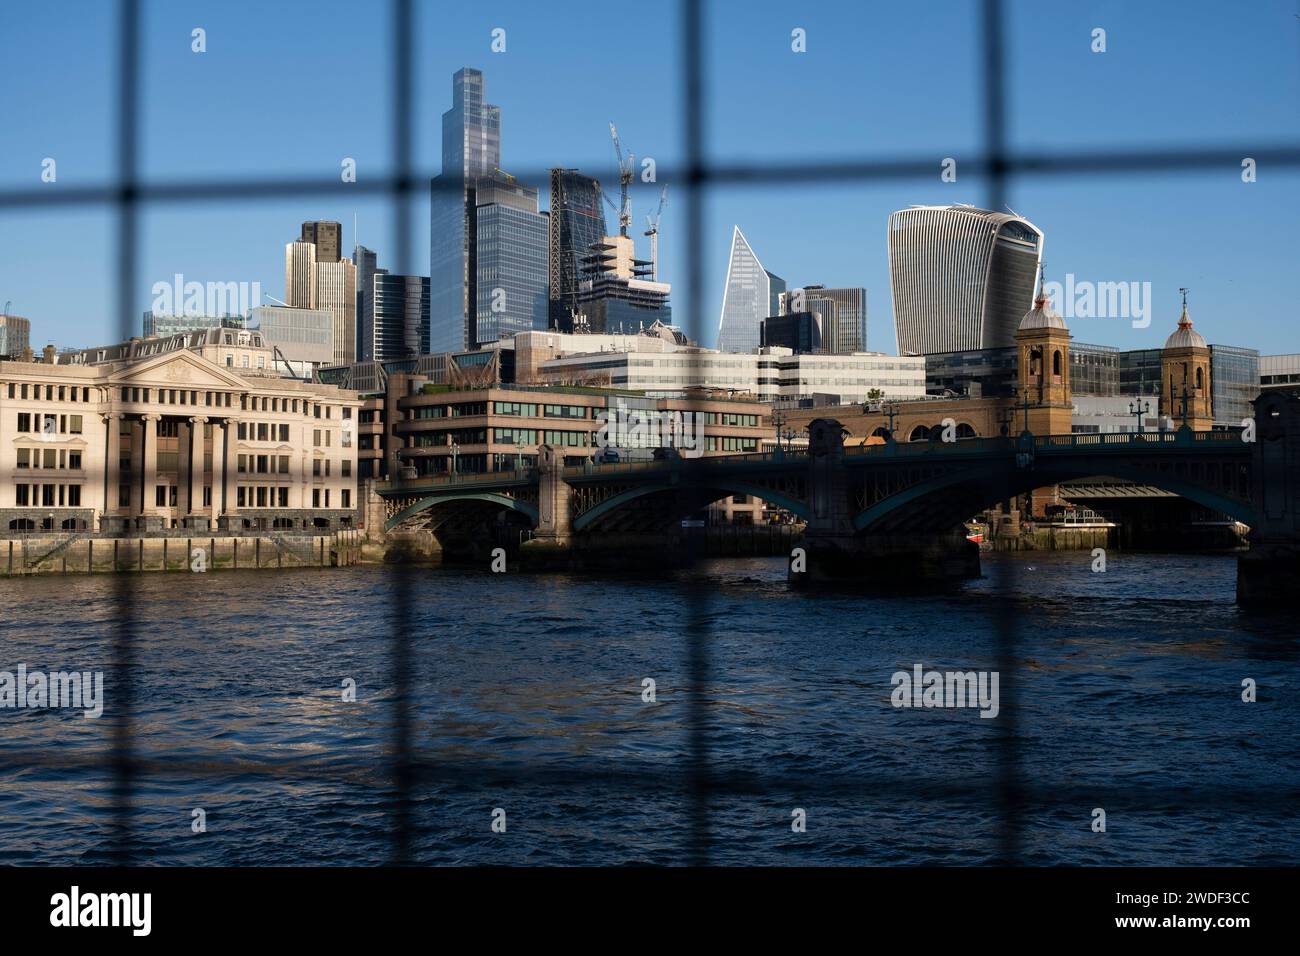 City of London skyline looking over the River Thames from behind metal mesh on 16th January 2024 in London, United Kingdom. The City of London is a city, ceremonial county and local government district that contains the primary central business district CBD of London. The City of London is widely referred to simply as the City is also colloquially known as the Square Mile. Stock Photo